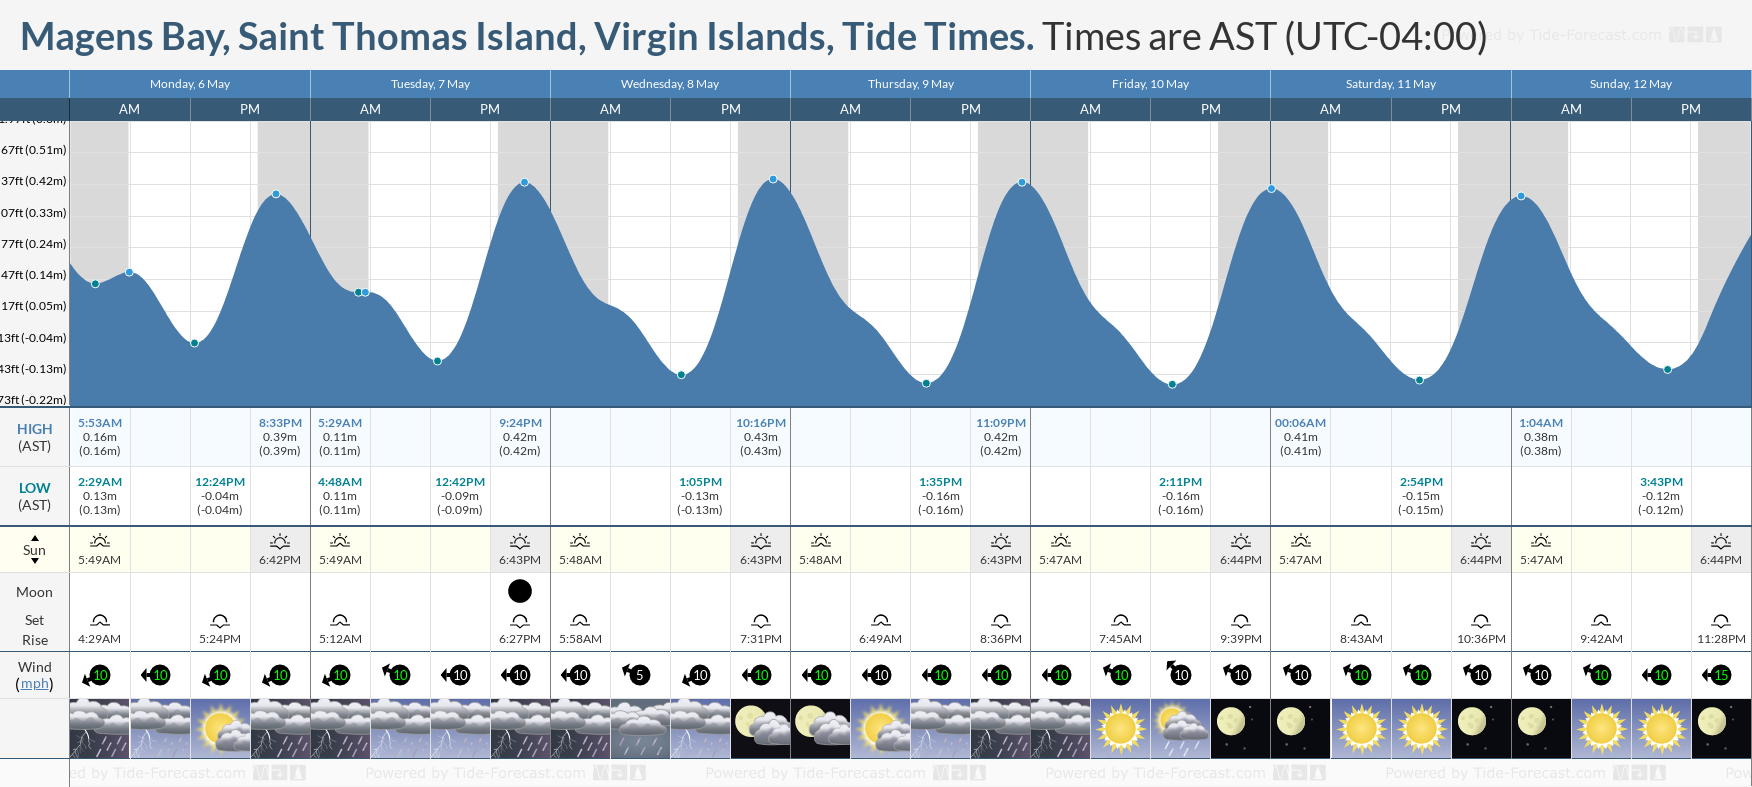 Magens Bay, Saint Thomas Island, Virgin Islands Tide Chart including high and low tide tide times for the next 7 days